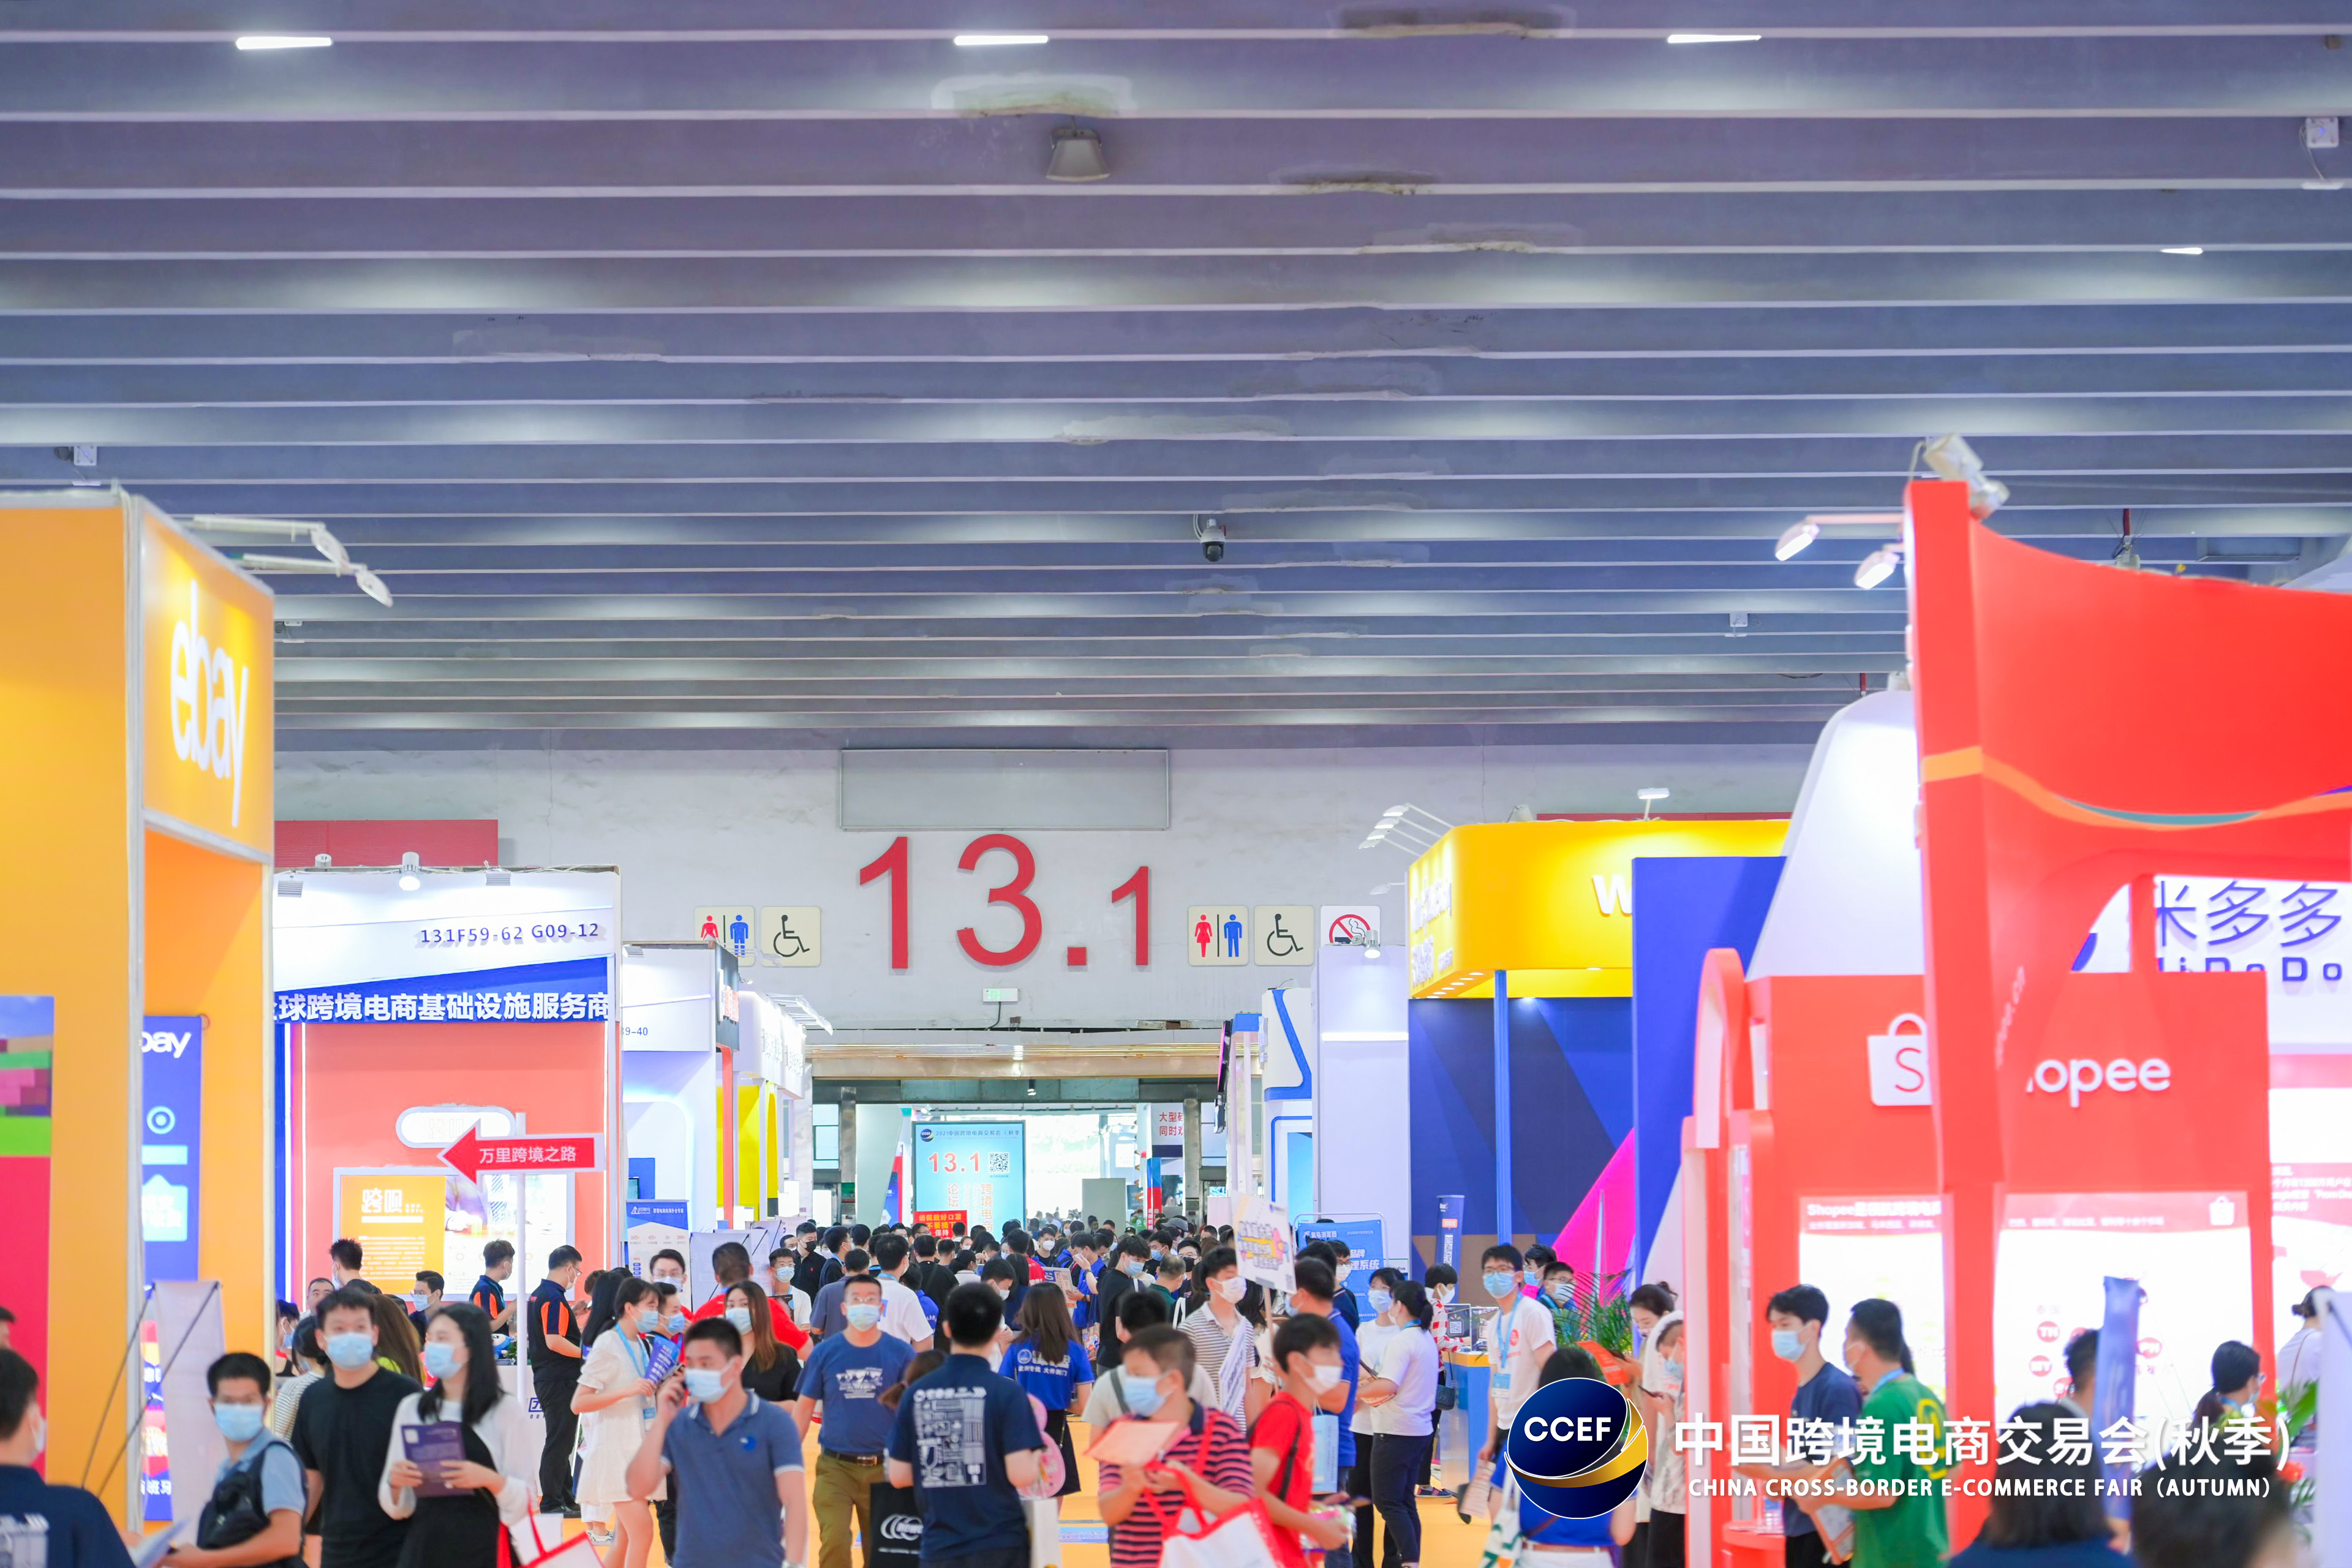 Leading platforms gather together for the strongest cross-border exhibition in the second half of the year, China Cross-border Trade Fair (Autumn) will meet you in the golden autumn and September sales season